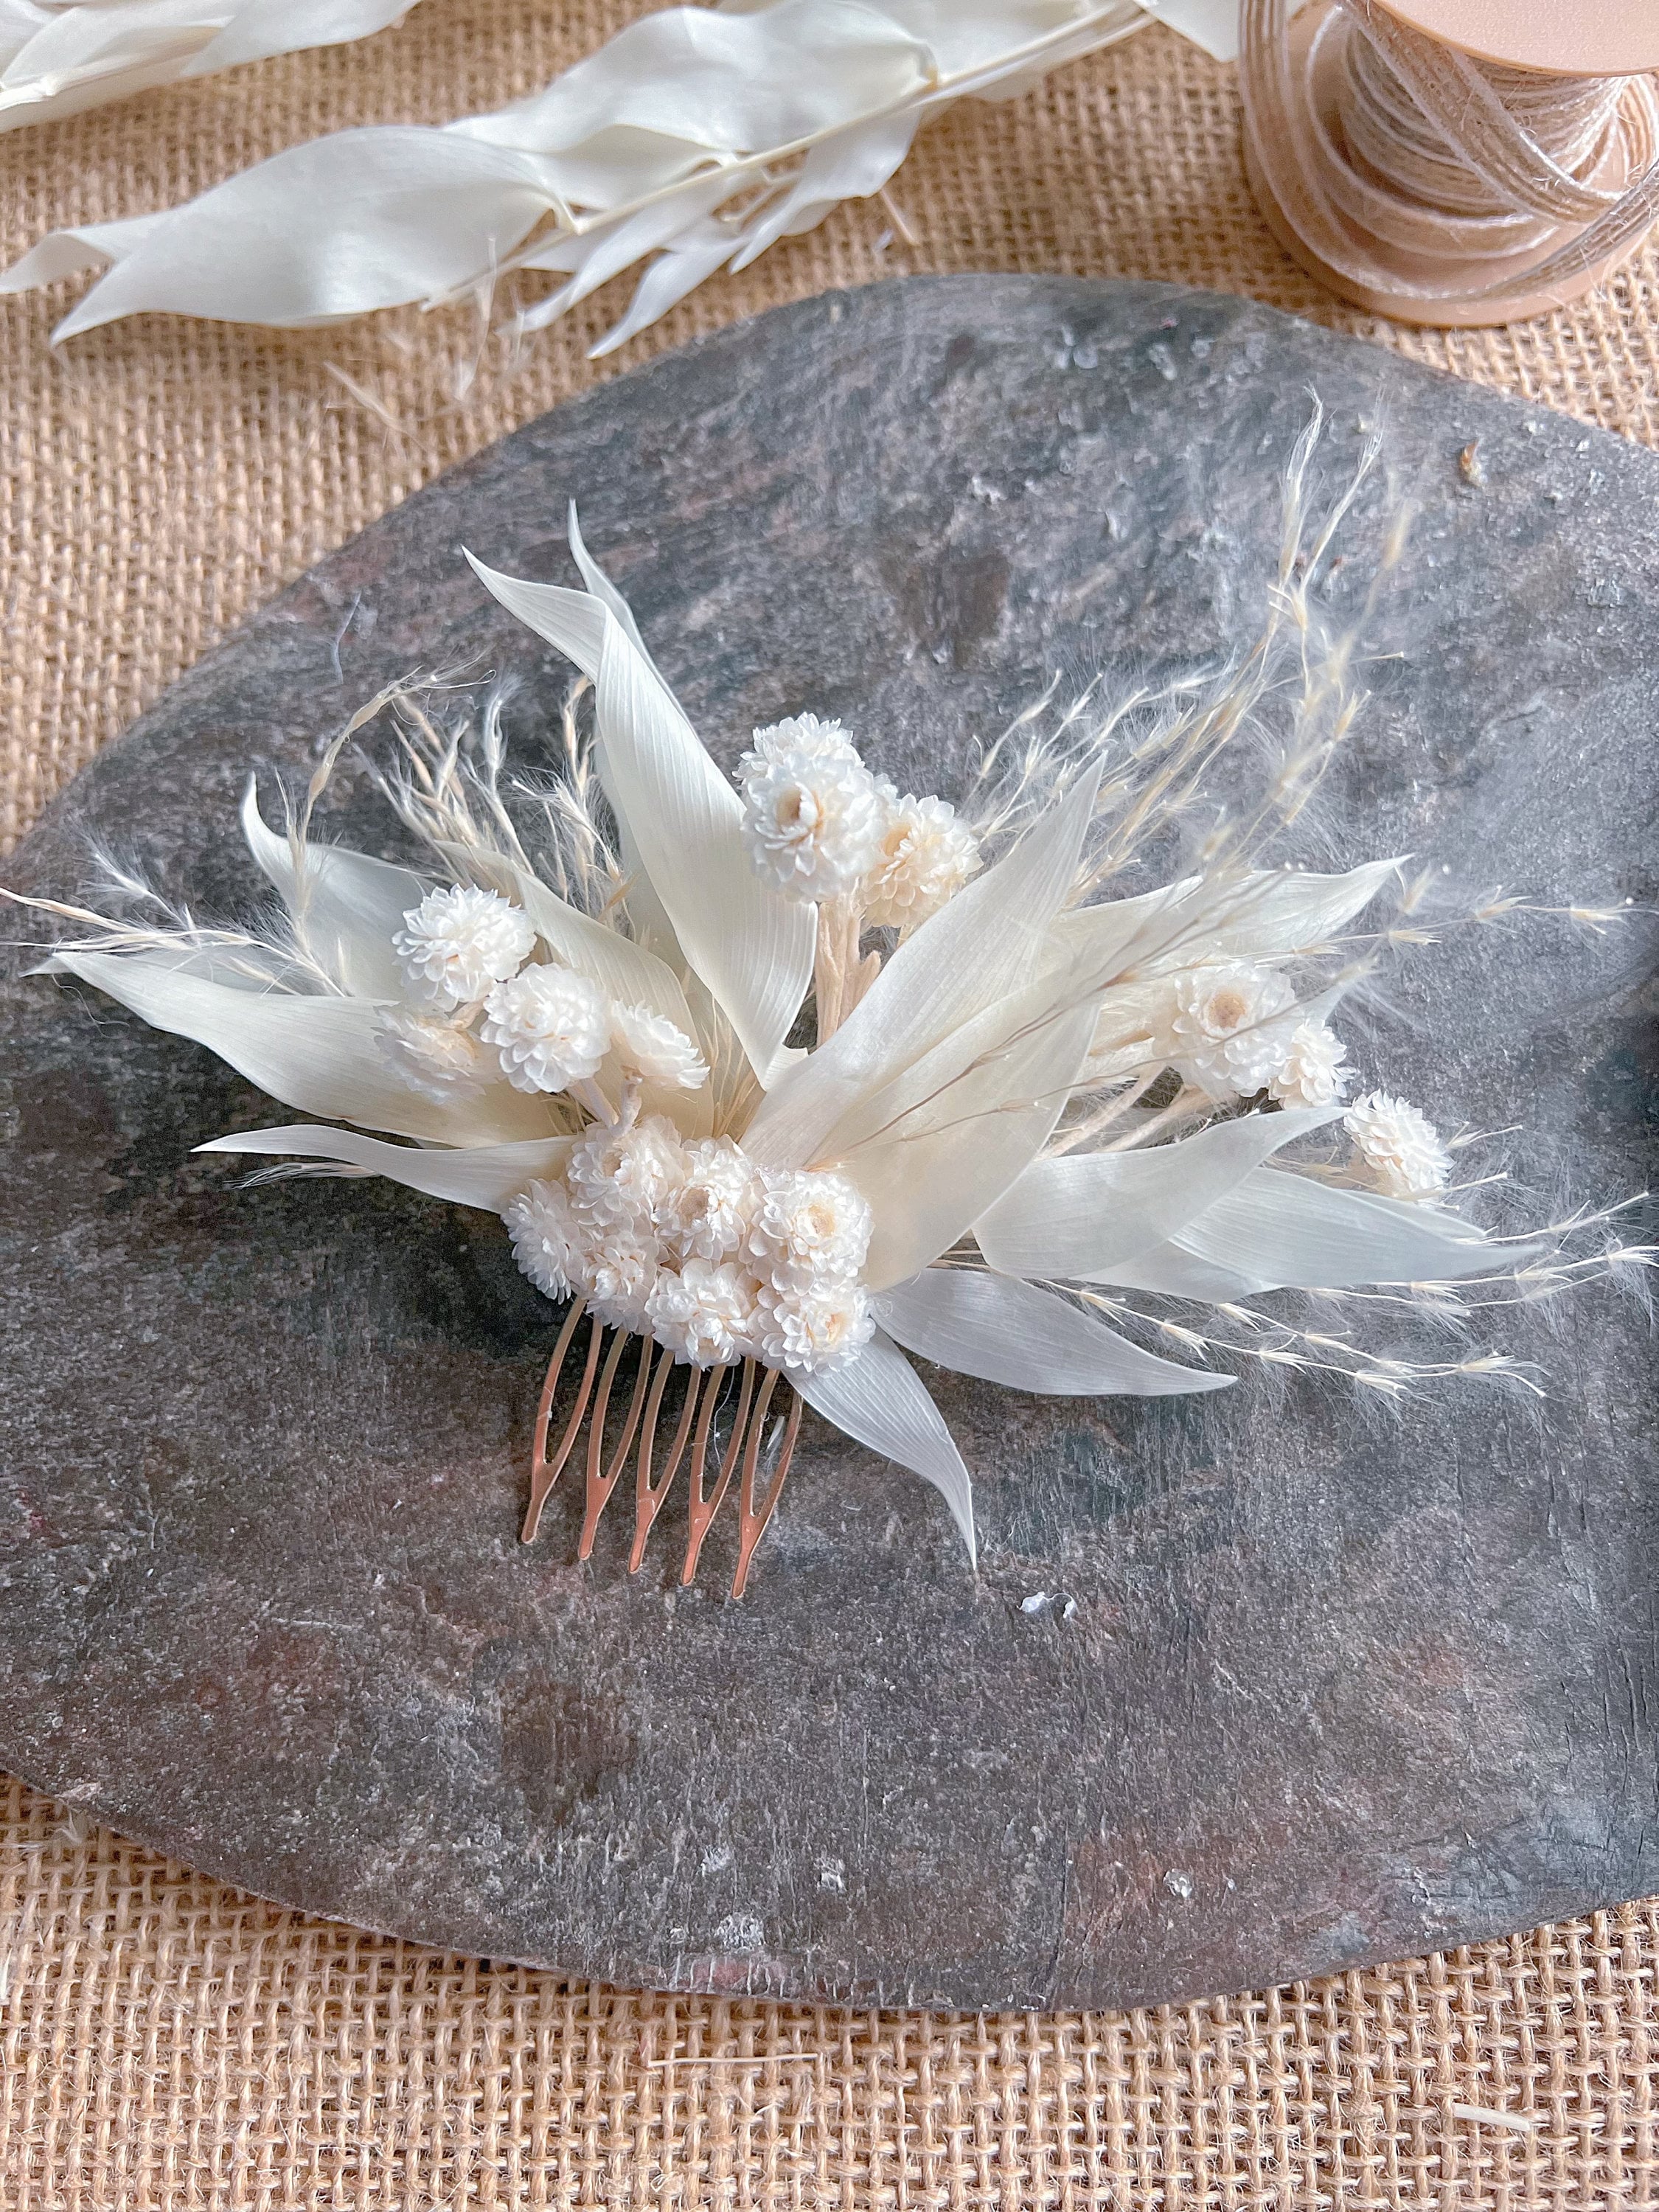 Boho Bridal White Ivory Dried Real Flower Hair Piece, Summer Wedding Romantic Bride Dry Comb, Floral Headpiece